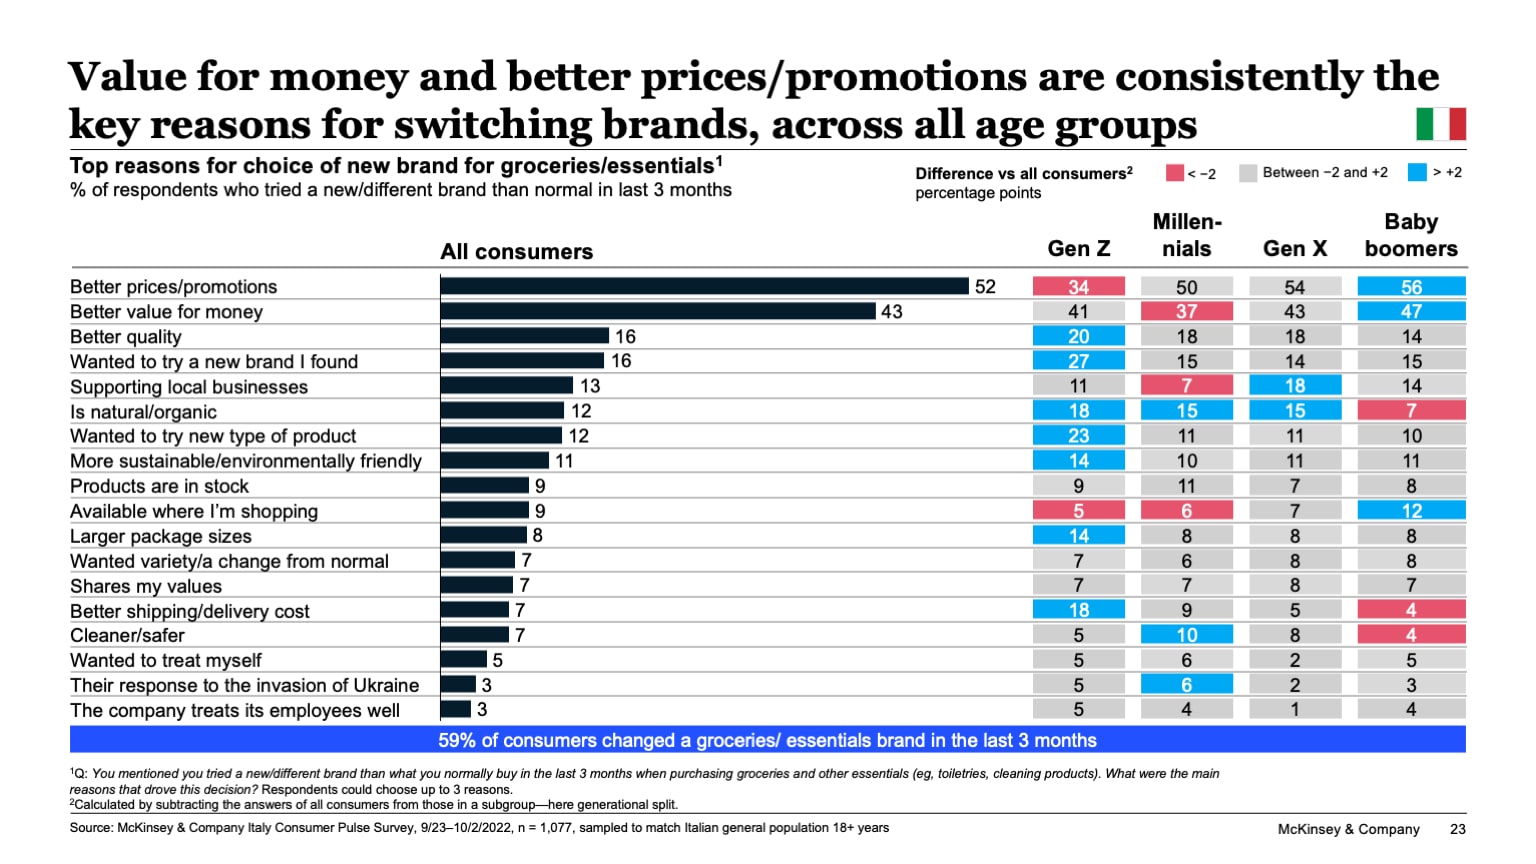 Value for money and better prices/promotions are consistently the key reasons for switching brands, across all age groups